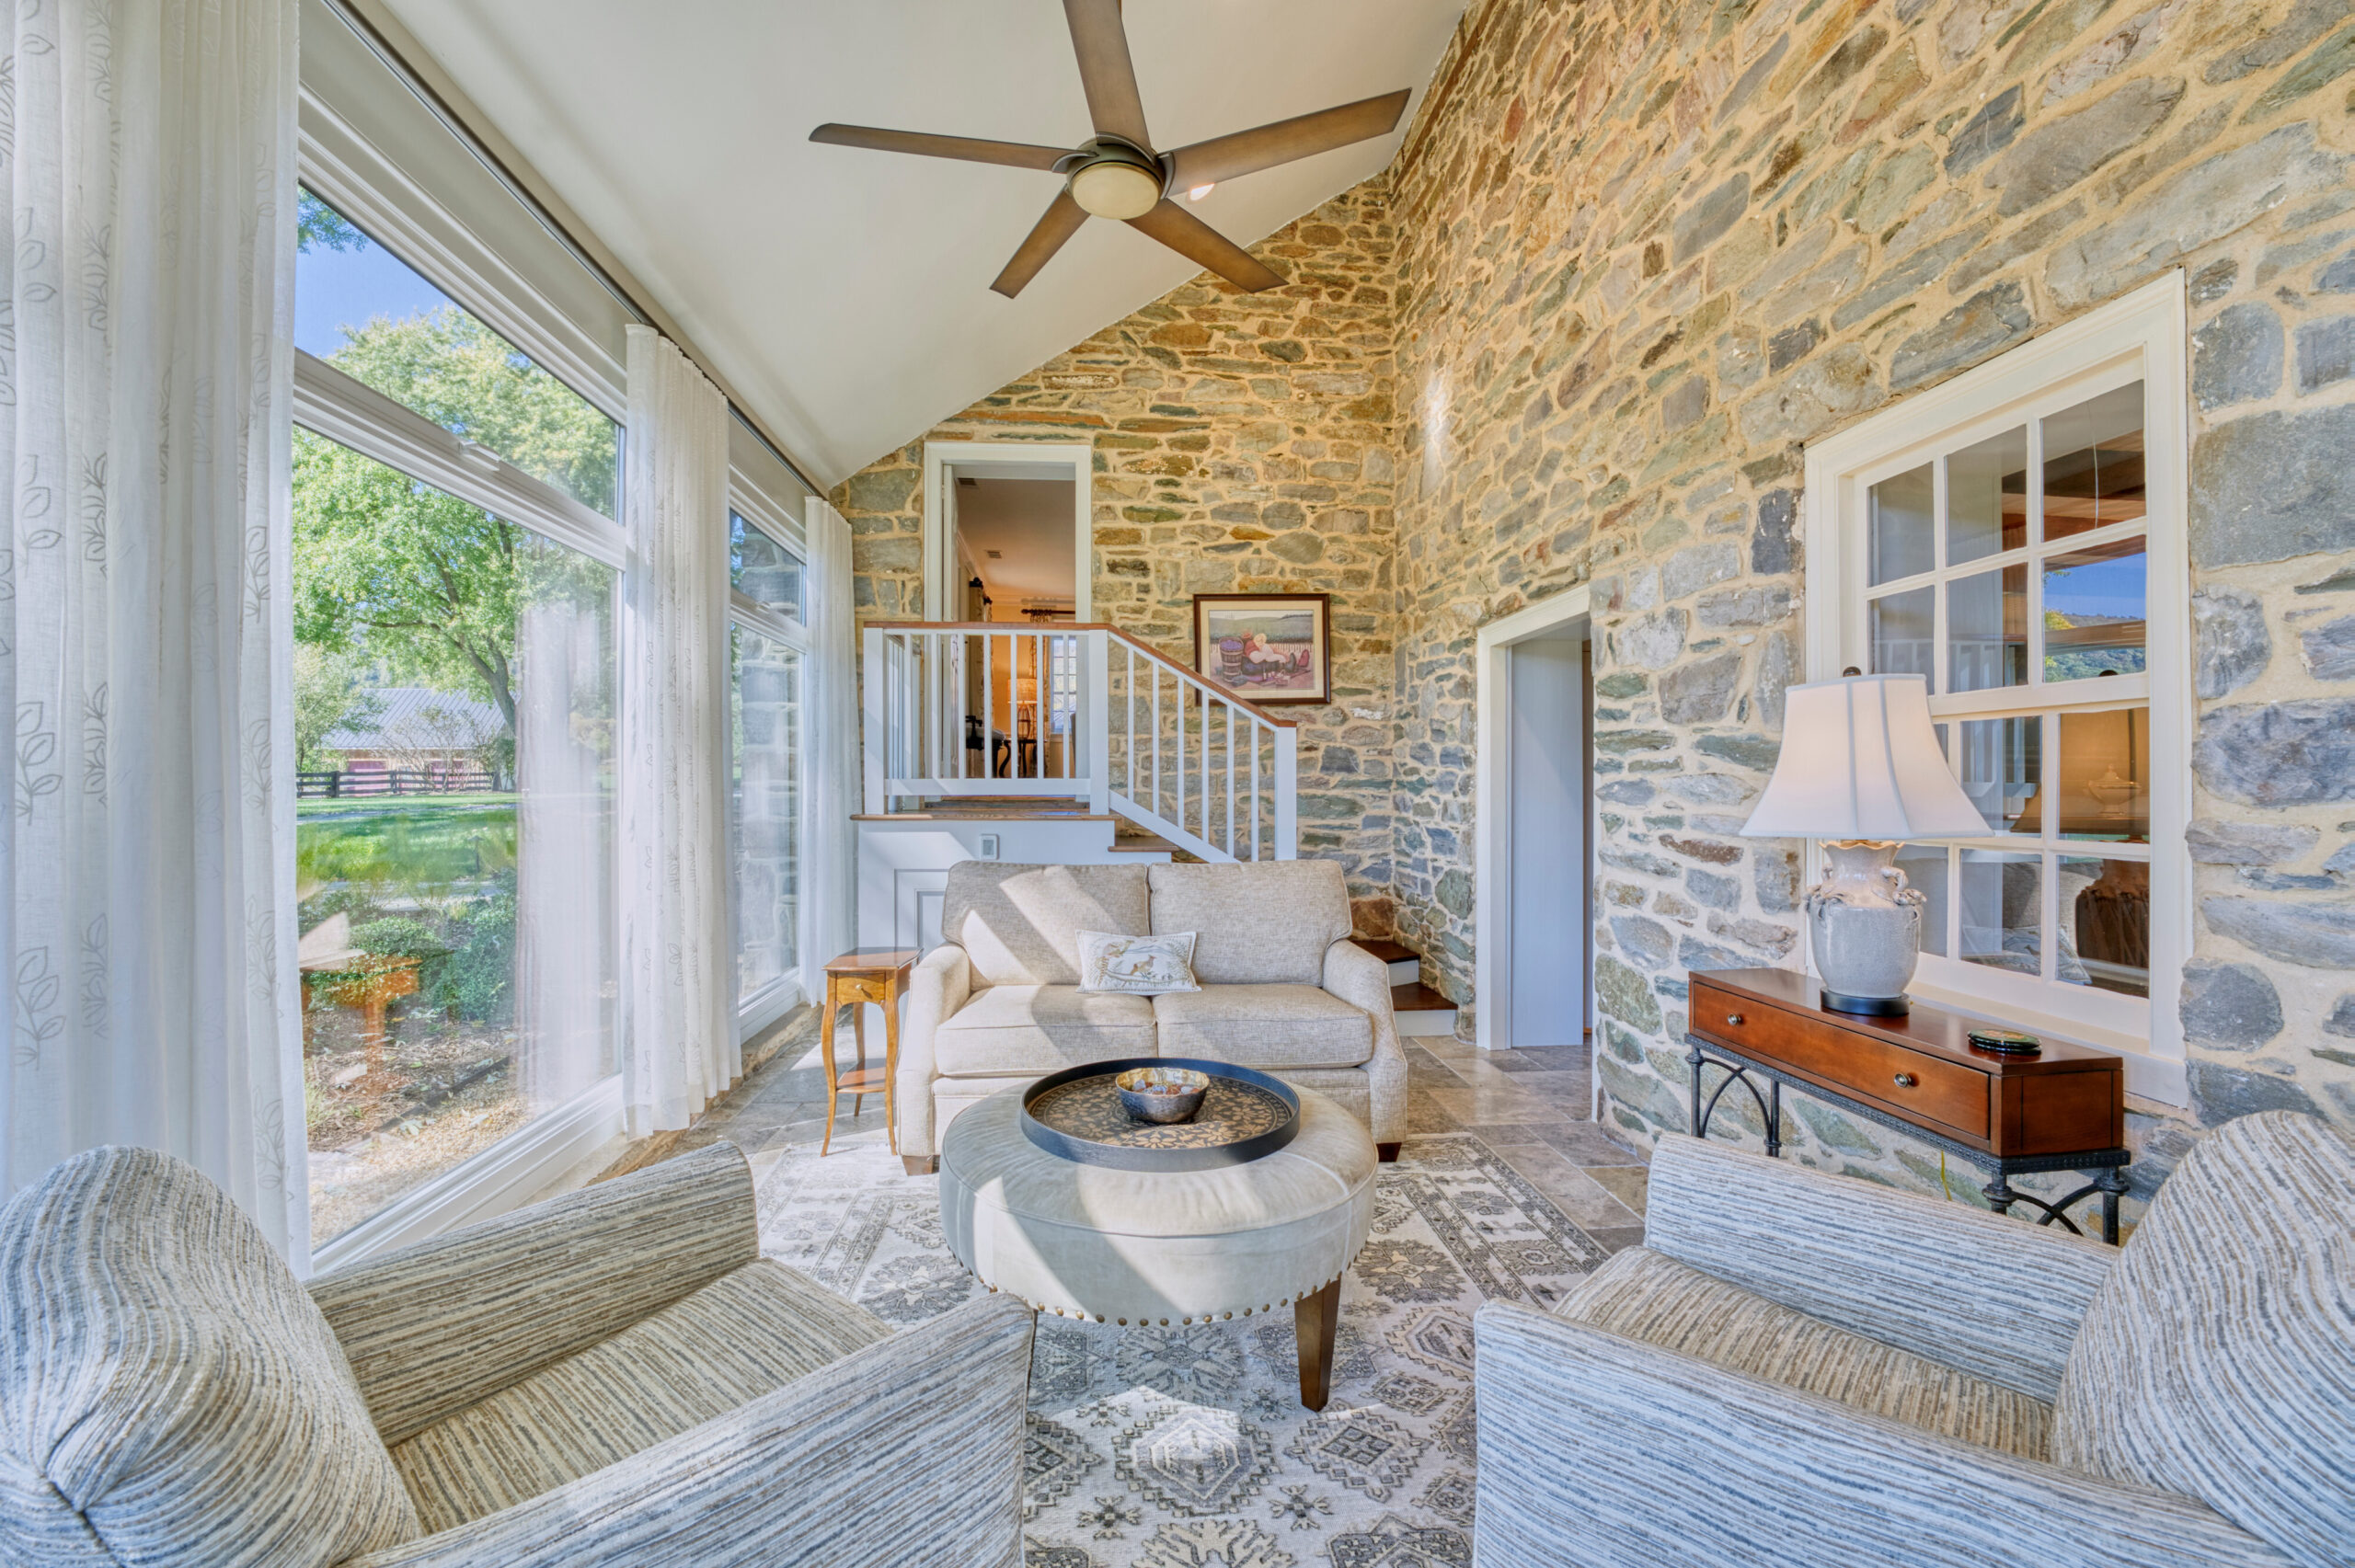 Professional interior photo of main house of Historic Hearthstone Manor: 35428 Appalachian Trail Rd, Round Hill, Virginia - showing brightly lit sunroom with wall to wall windows on the left and stone walls on the right and straight ahead